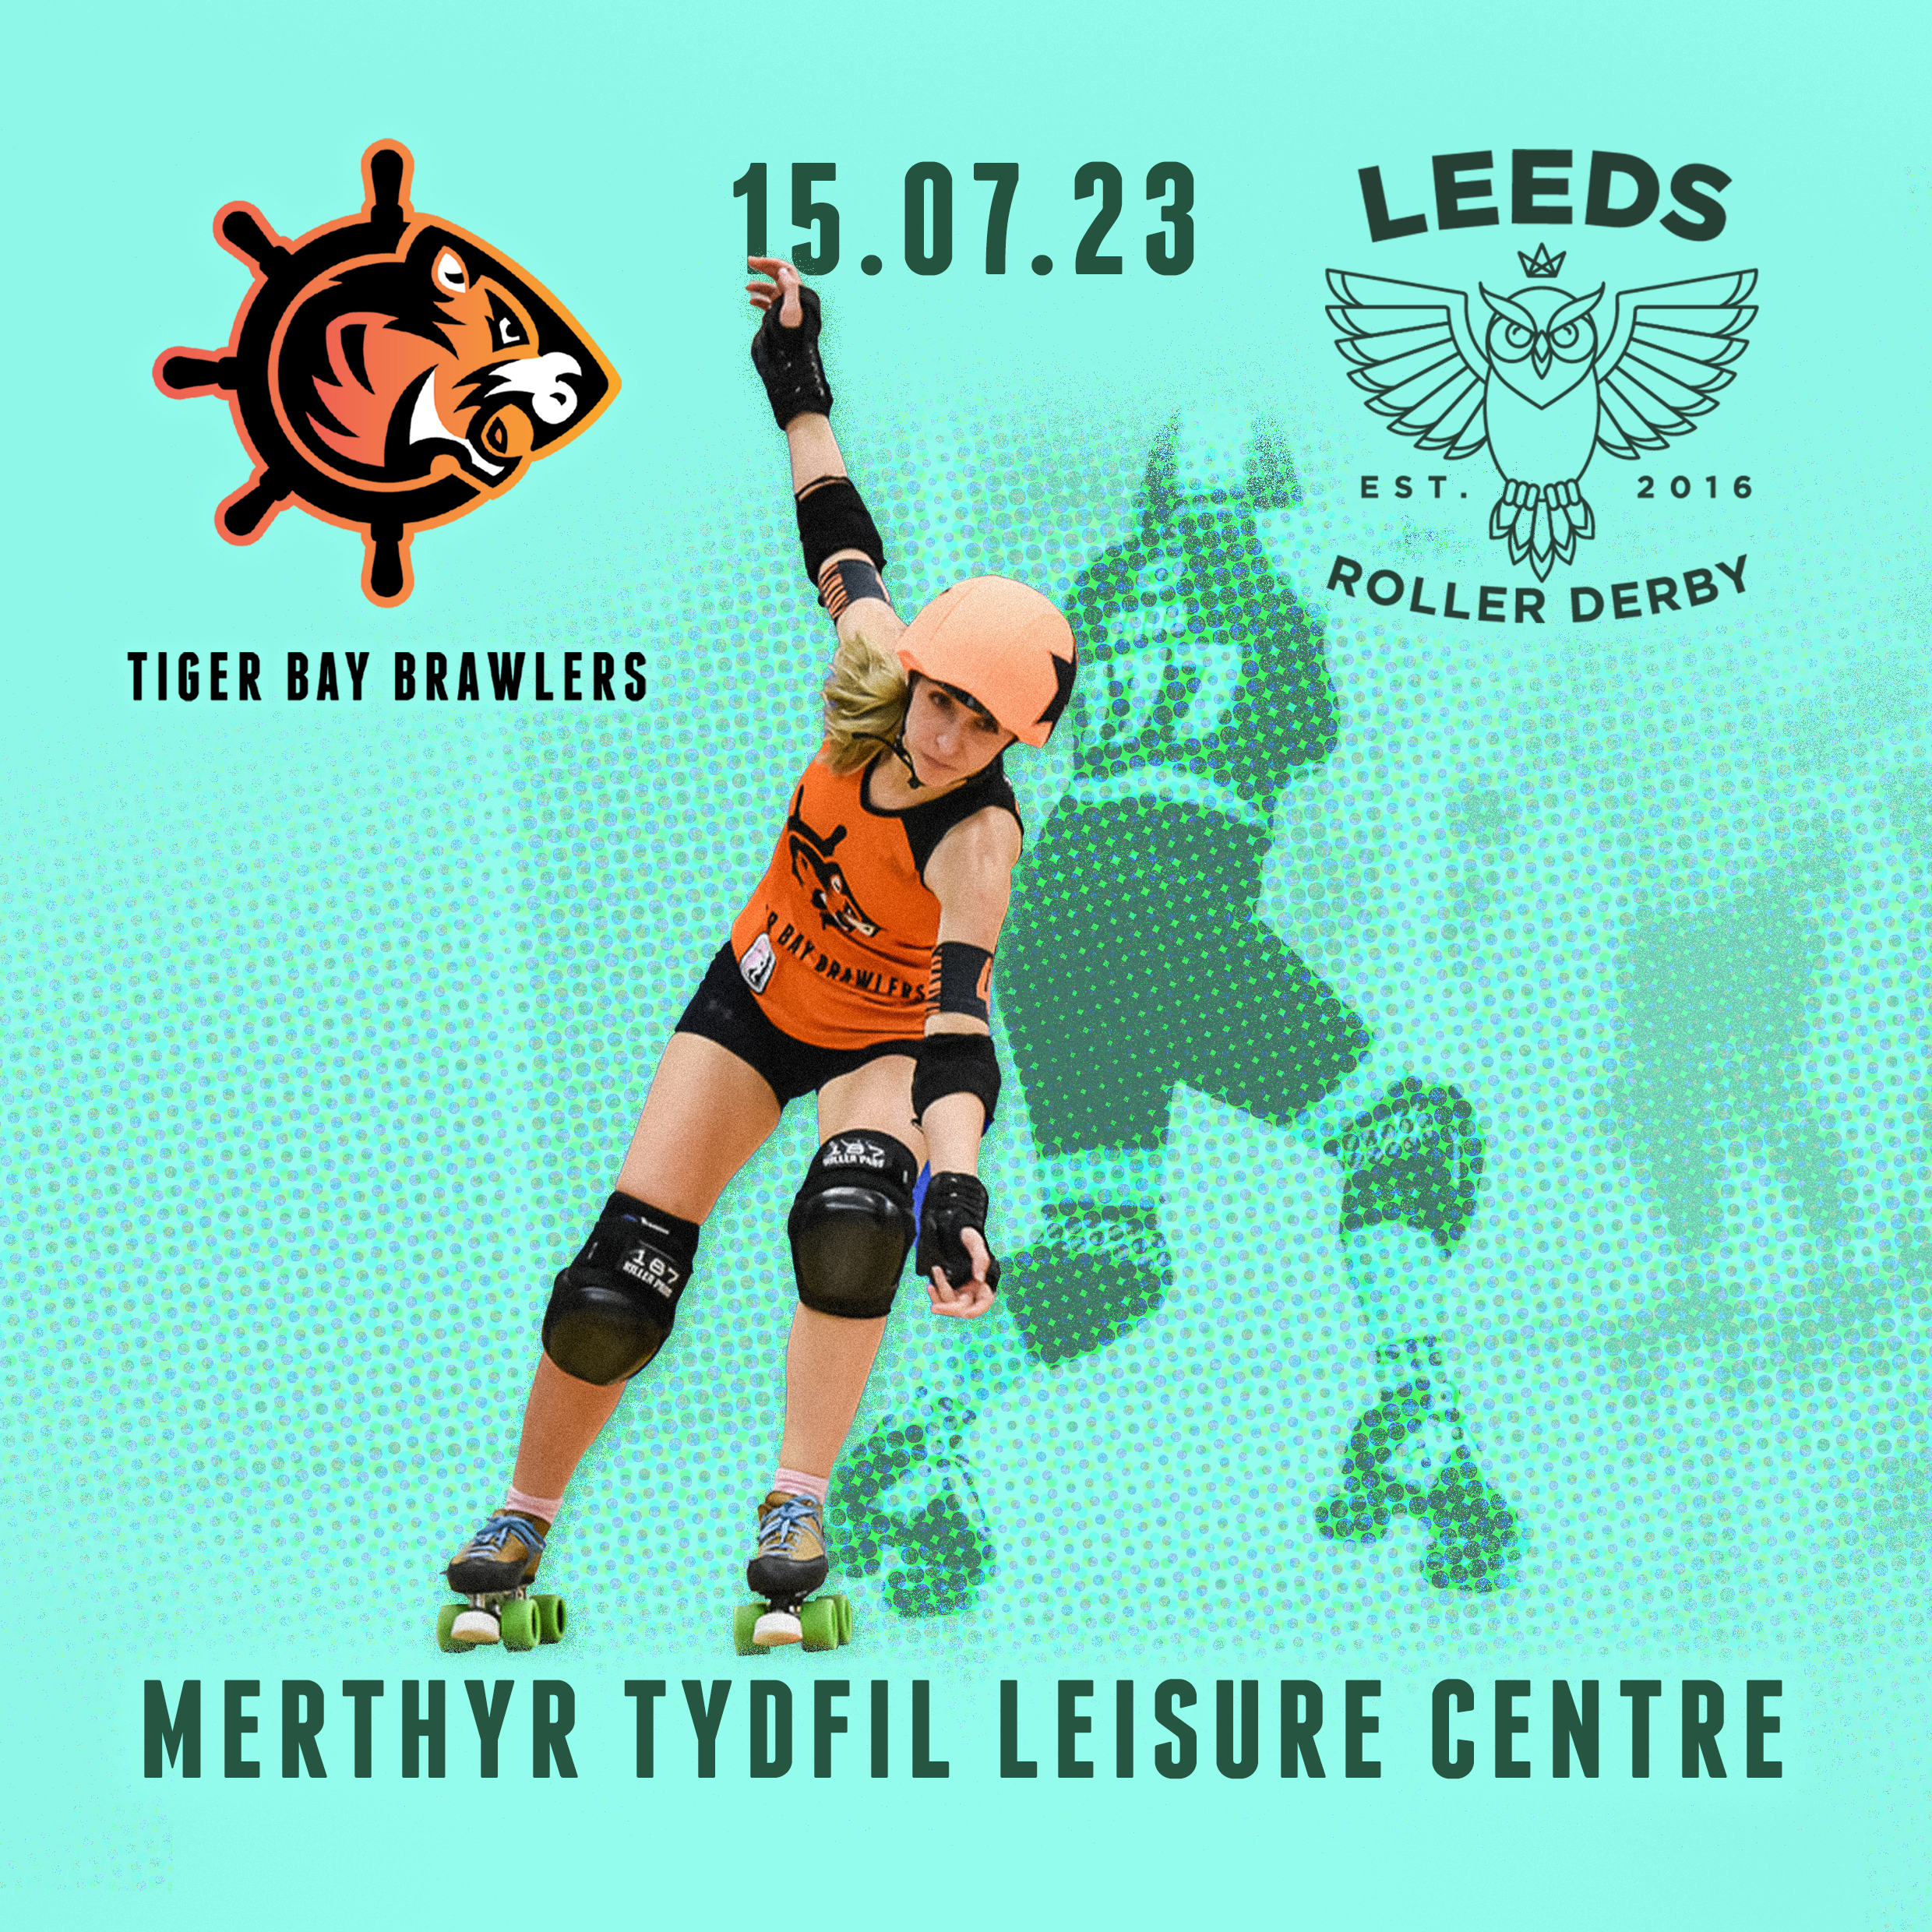 Promotional poster photo for home game in Merthyr Tydfil against Leeds on 15th July 2023